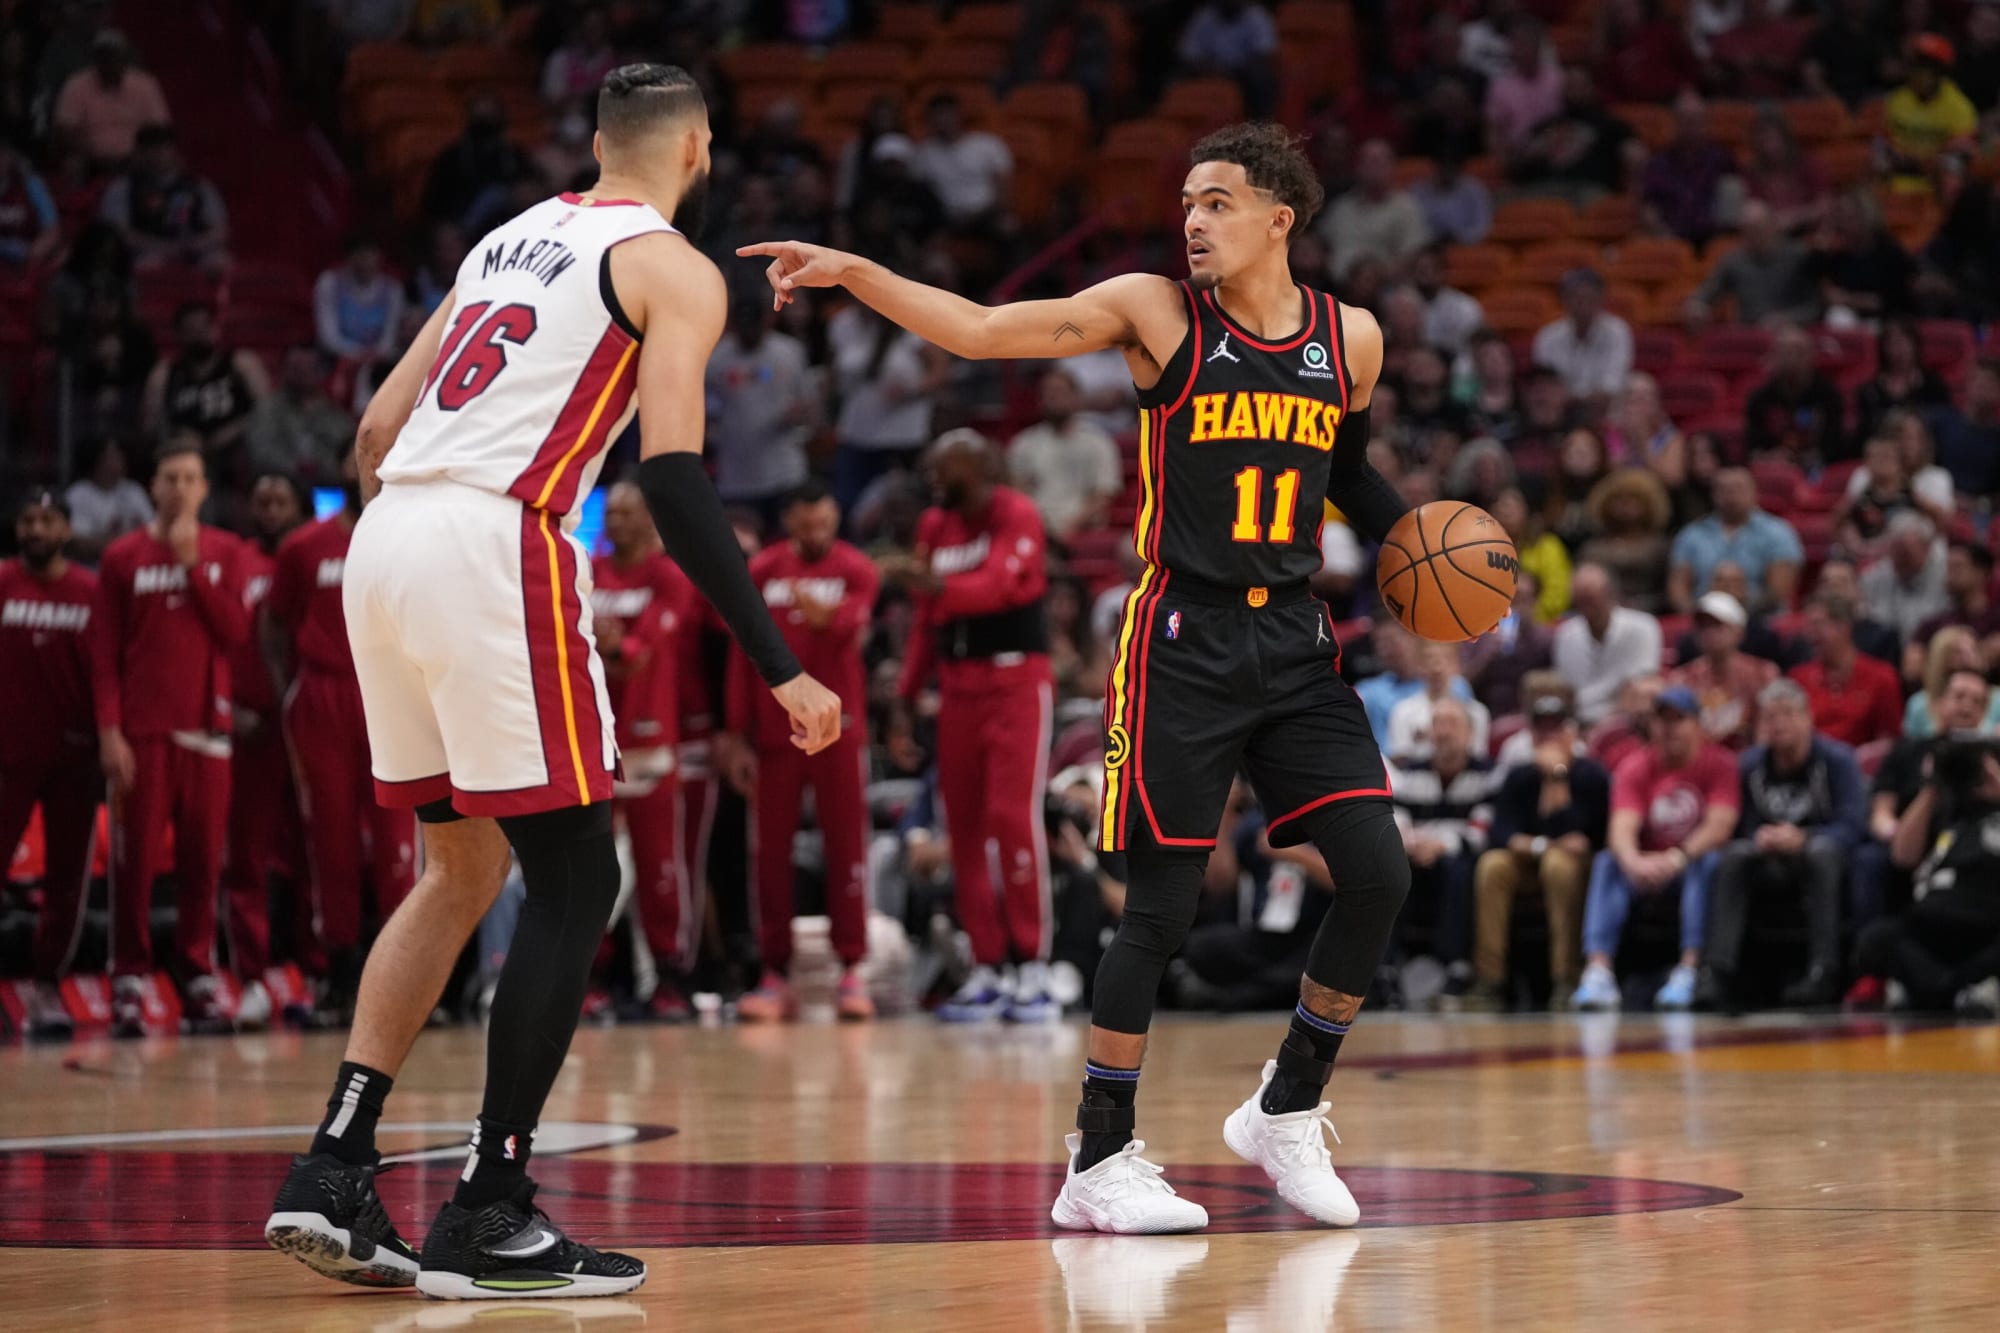 Atlanta Hawks superstar Trae Young shows that game recognizes game